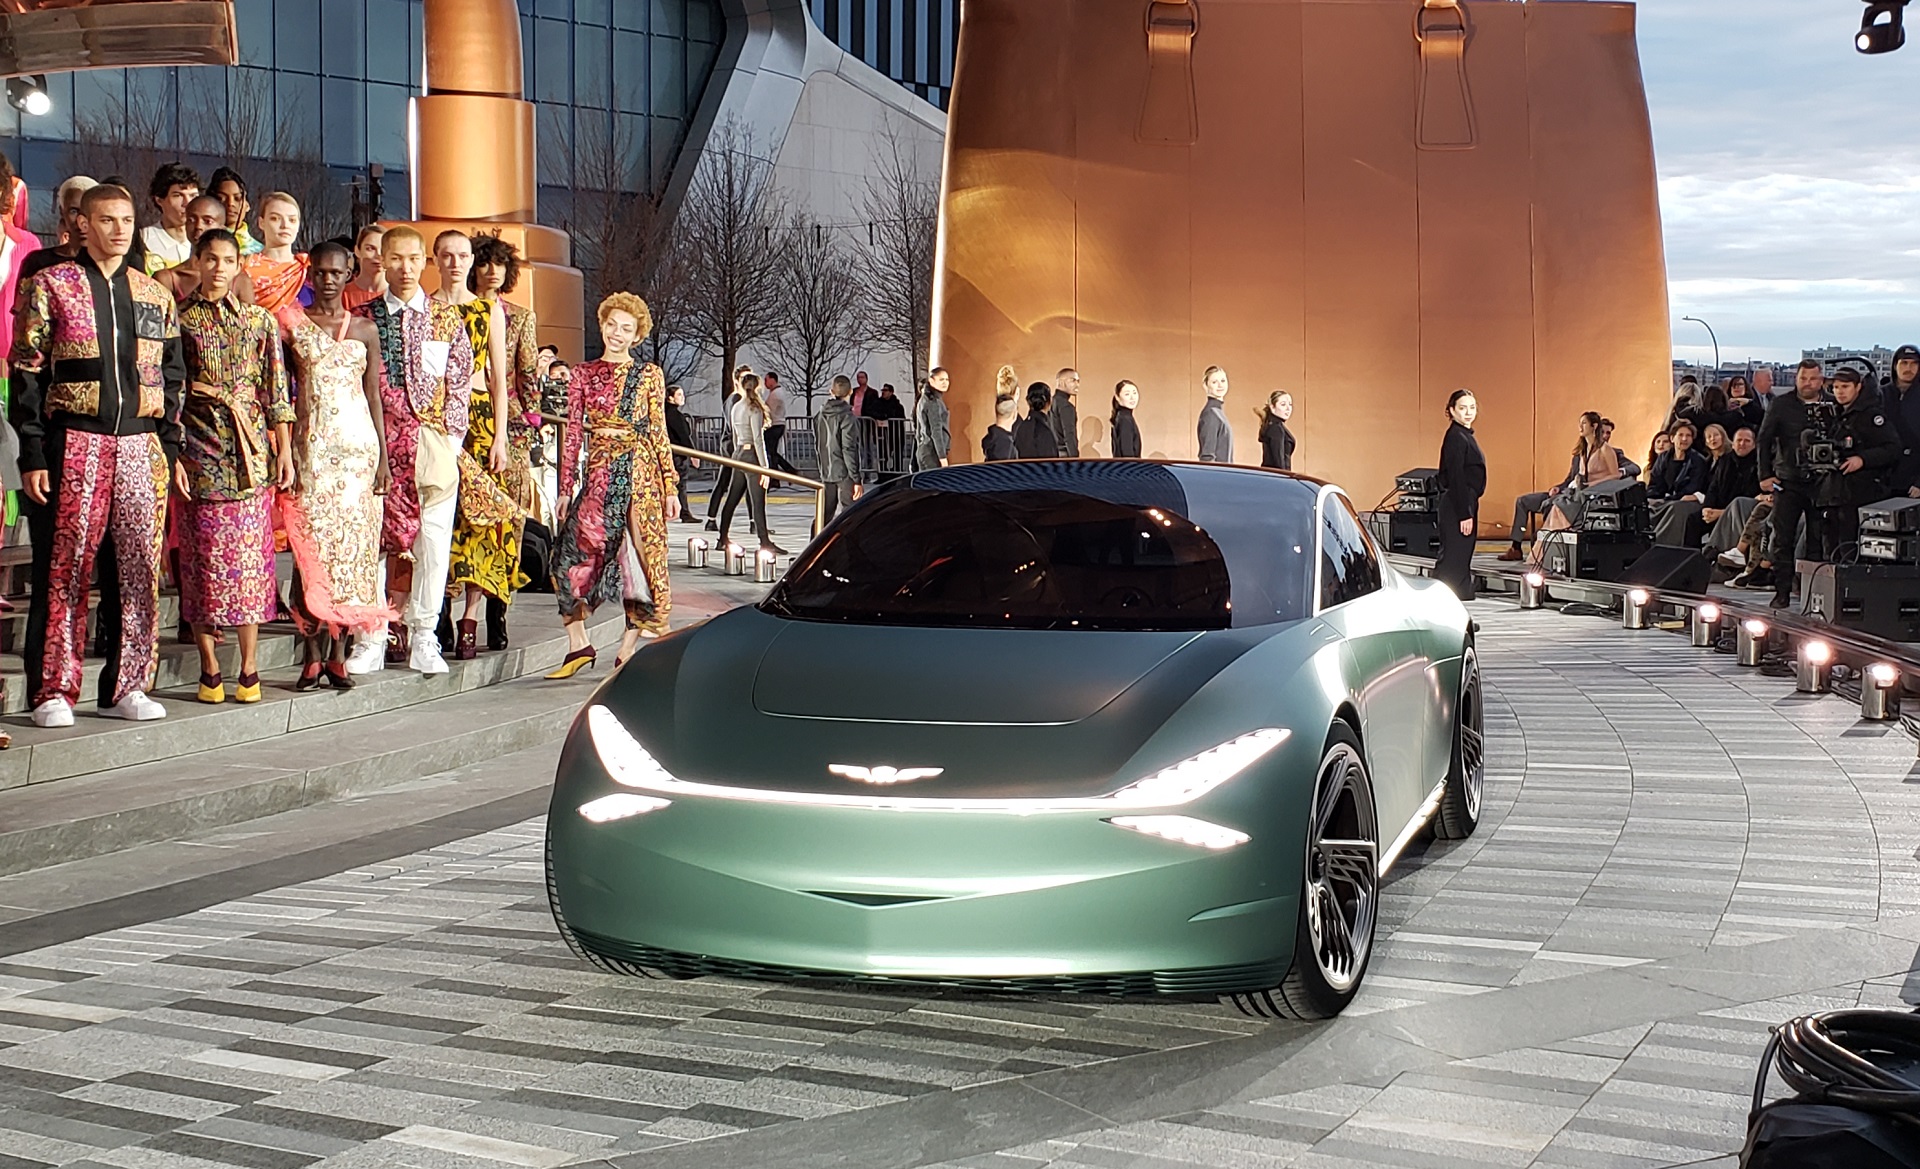 Genesis Mint Concept luxury urban electric twoseater debuts in New York